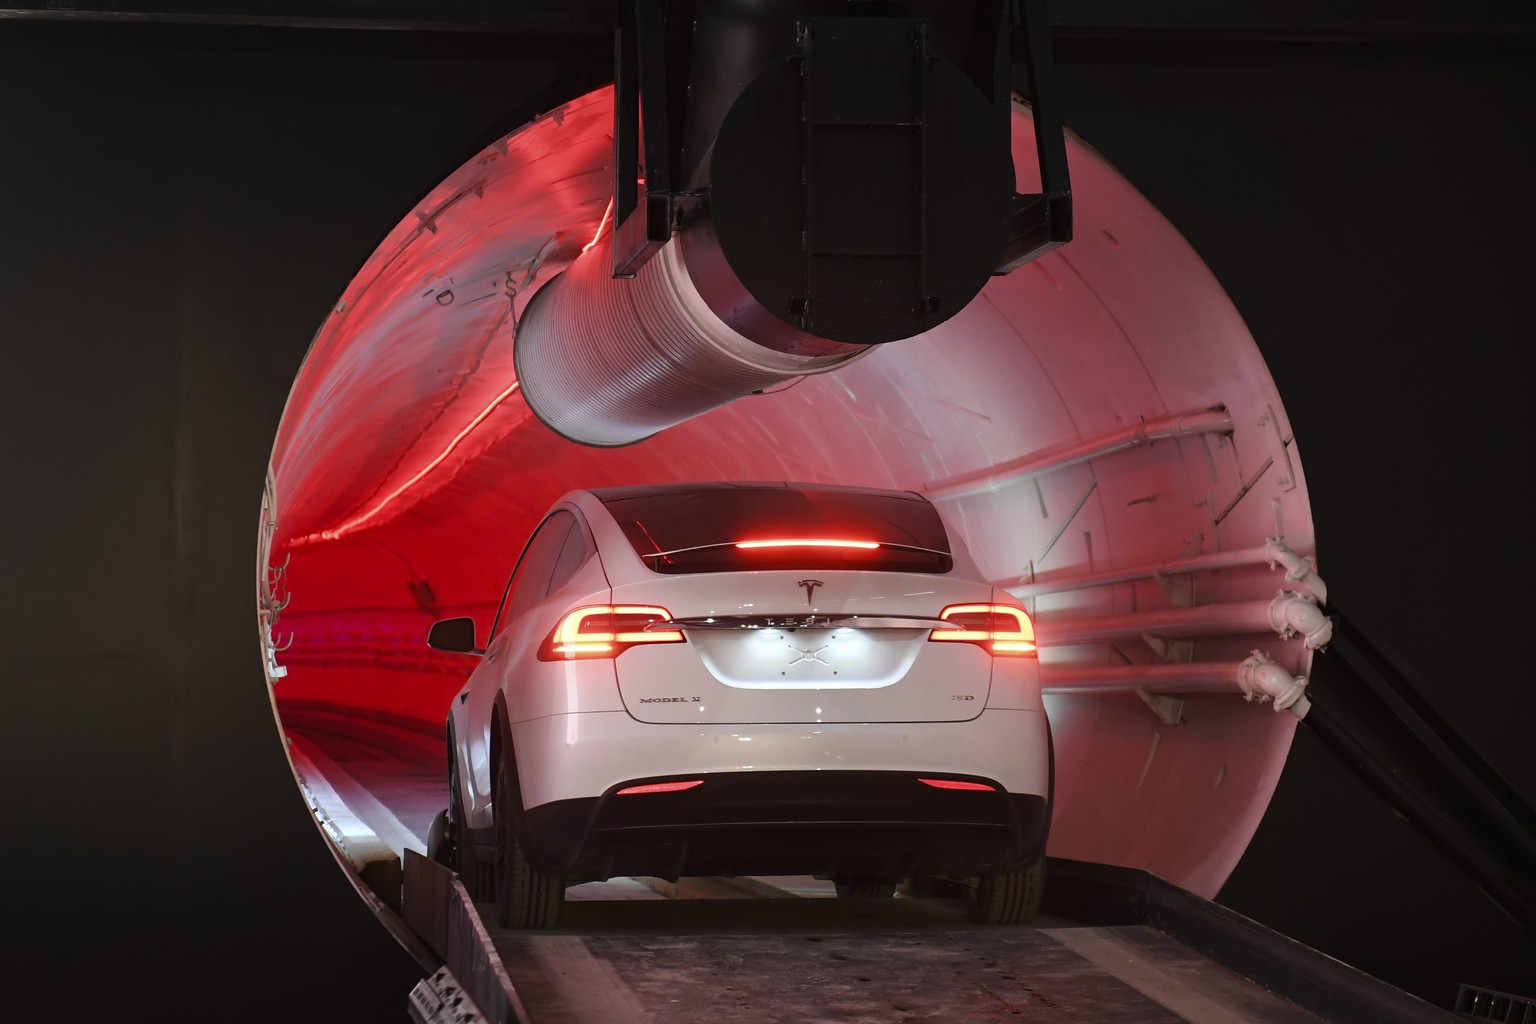 A modified Tesla Model X drives in the tunnel entrance before an unveiling event for the Boring Co. Hawthorne test tunnel in Hawthorne, Calif., Tuesday, Dec. 18, 2018. Elon Musk unveiled his undergrou ...